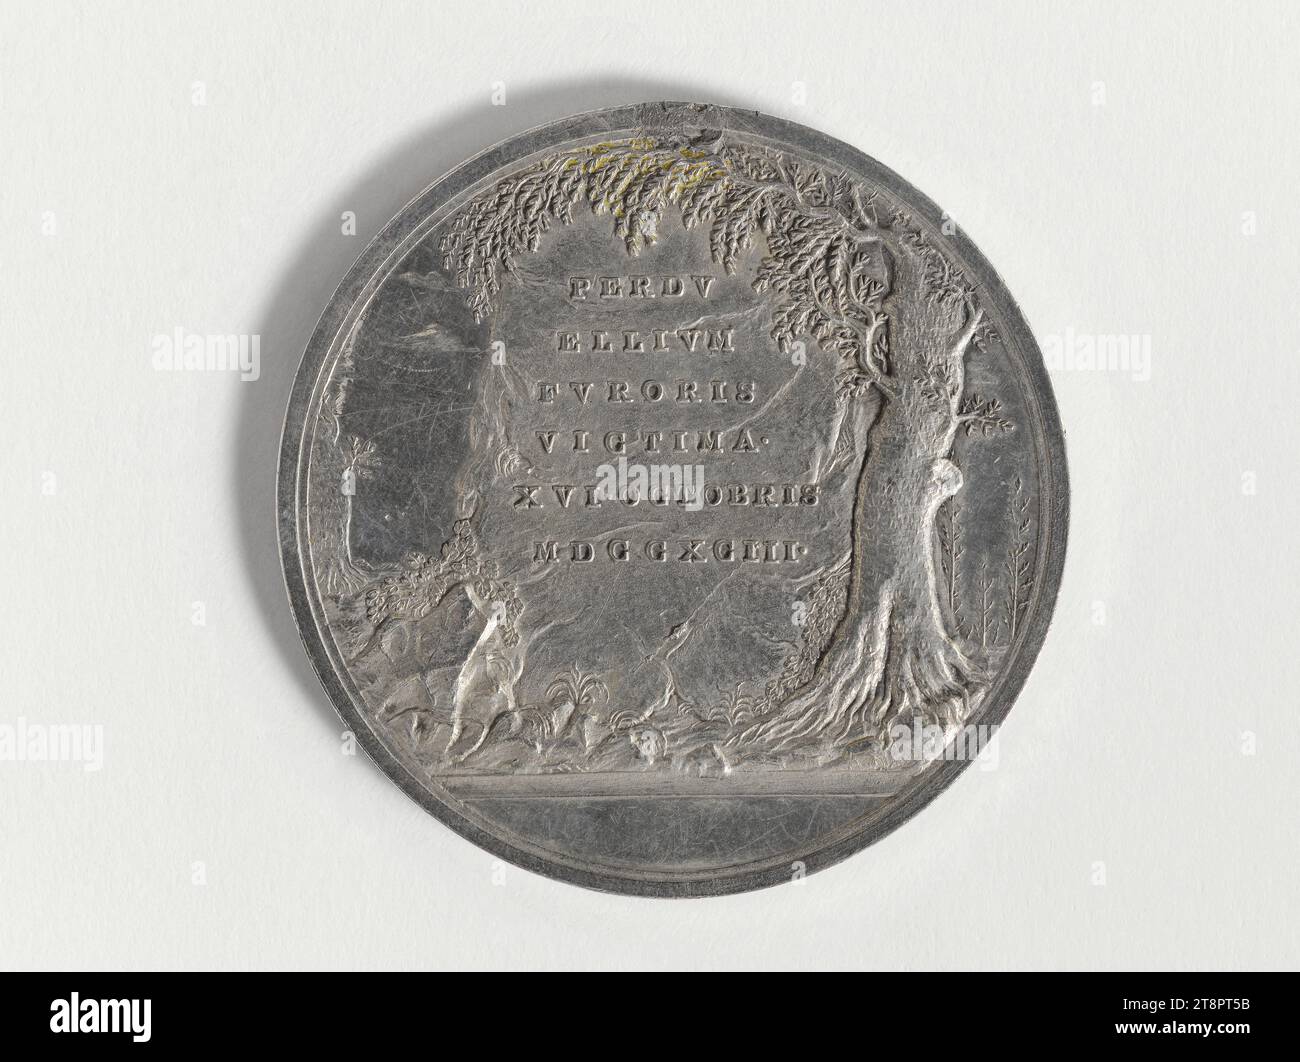 Commemoration of the execution of Marie-Antoinette, October 16, 1793, Baldenbach, Peter, Engraver, Array, Numismatic, Medal, Dimensions - Work: Diameter: 4.7 cm, Weight (type size): 26.31 g Stock Photo